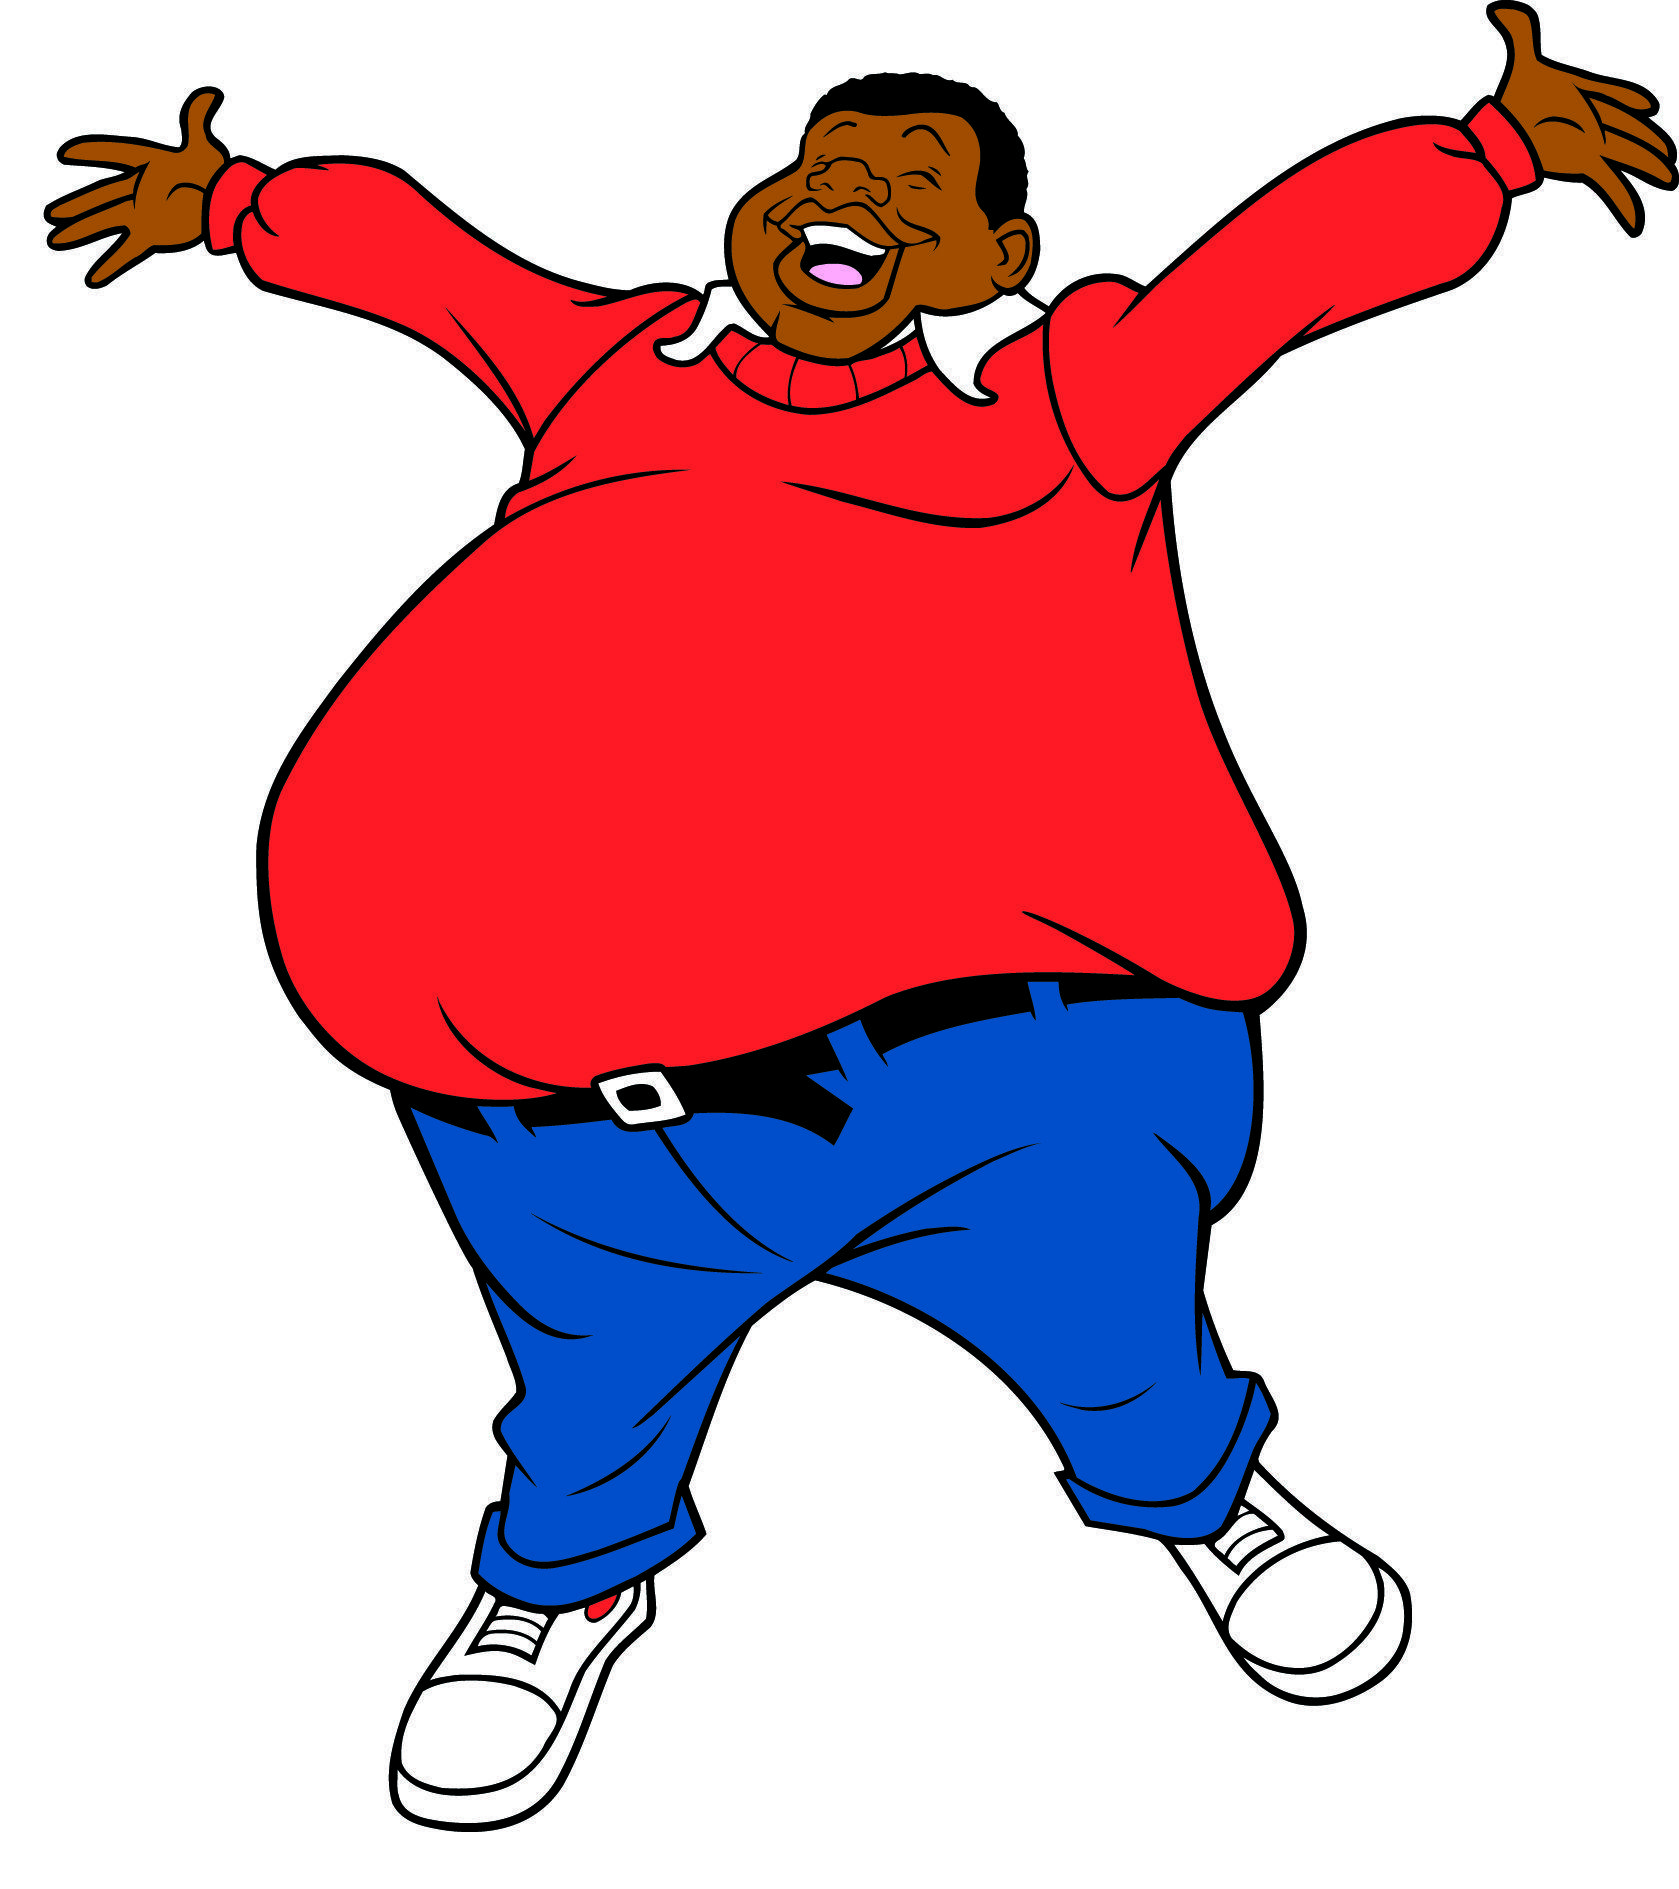 Who Was the Inspiration for Fat Albert?